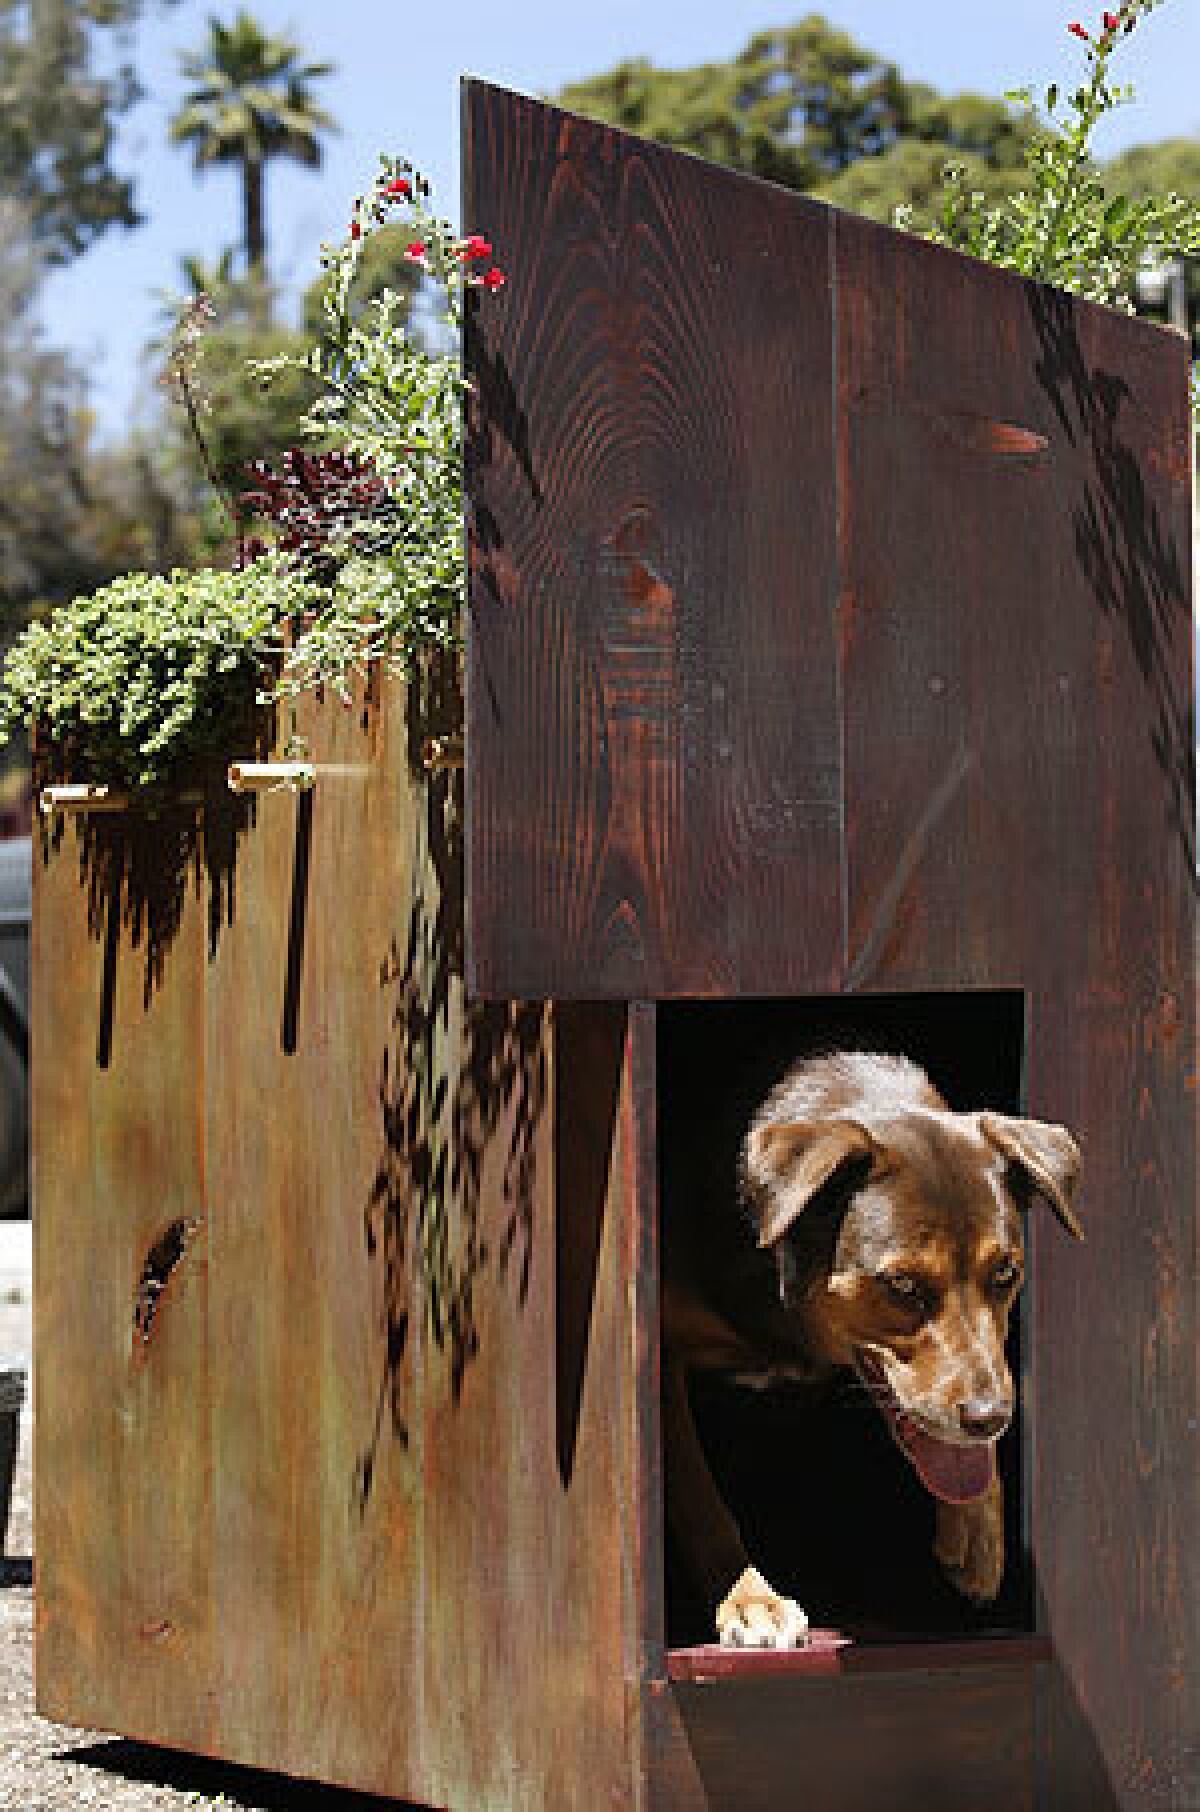 Stephanie Rubin says she would love a green roof on her house, but instead built a planted doghouse for Gretel.